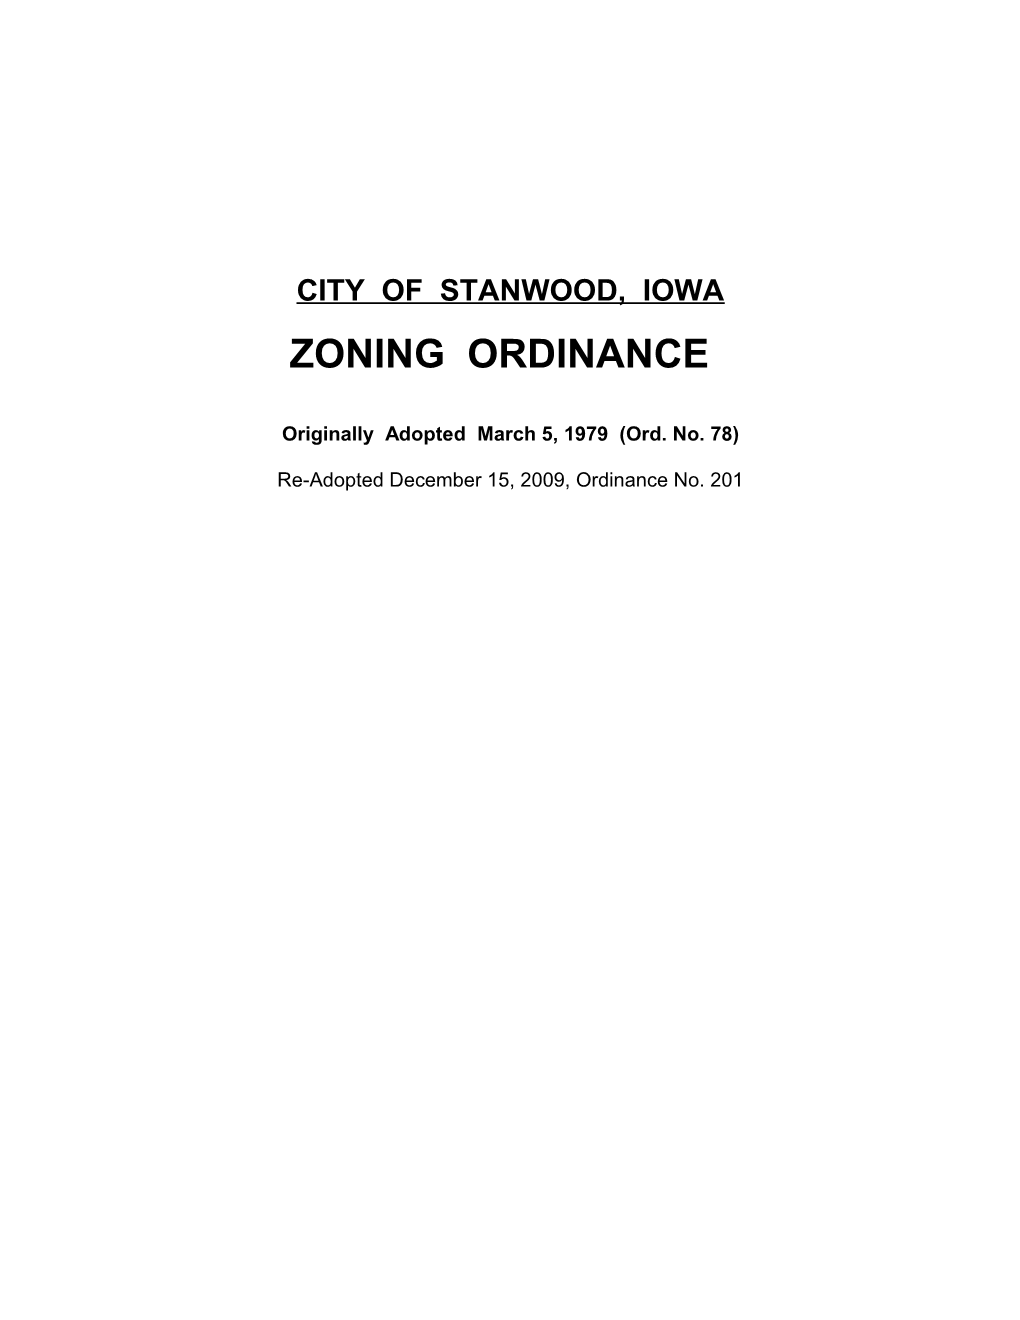 An Ordinance Establishing Comprehensive Zoning Regulations for the City of Stanwood, Iowa